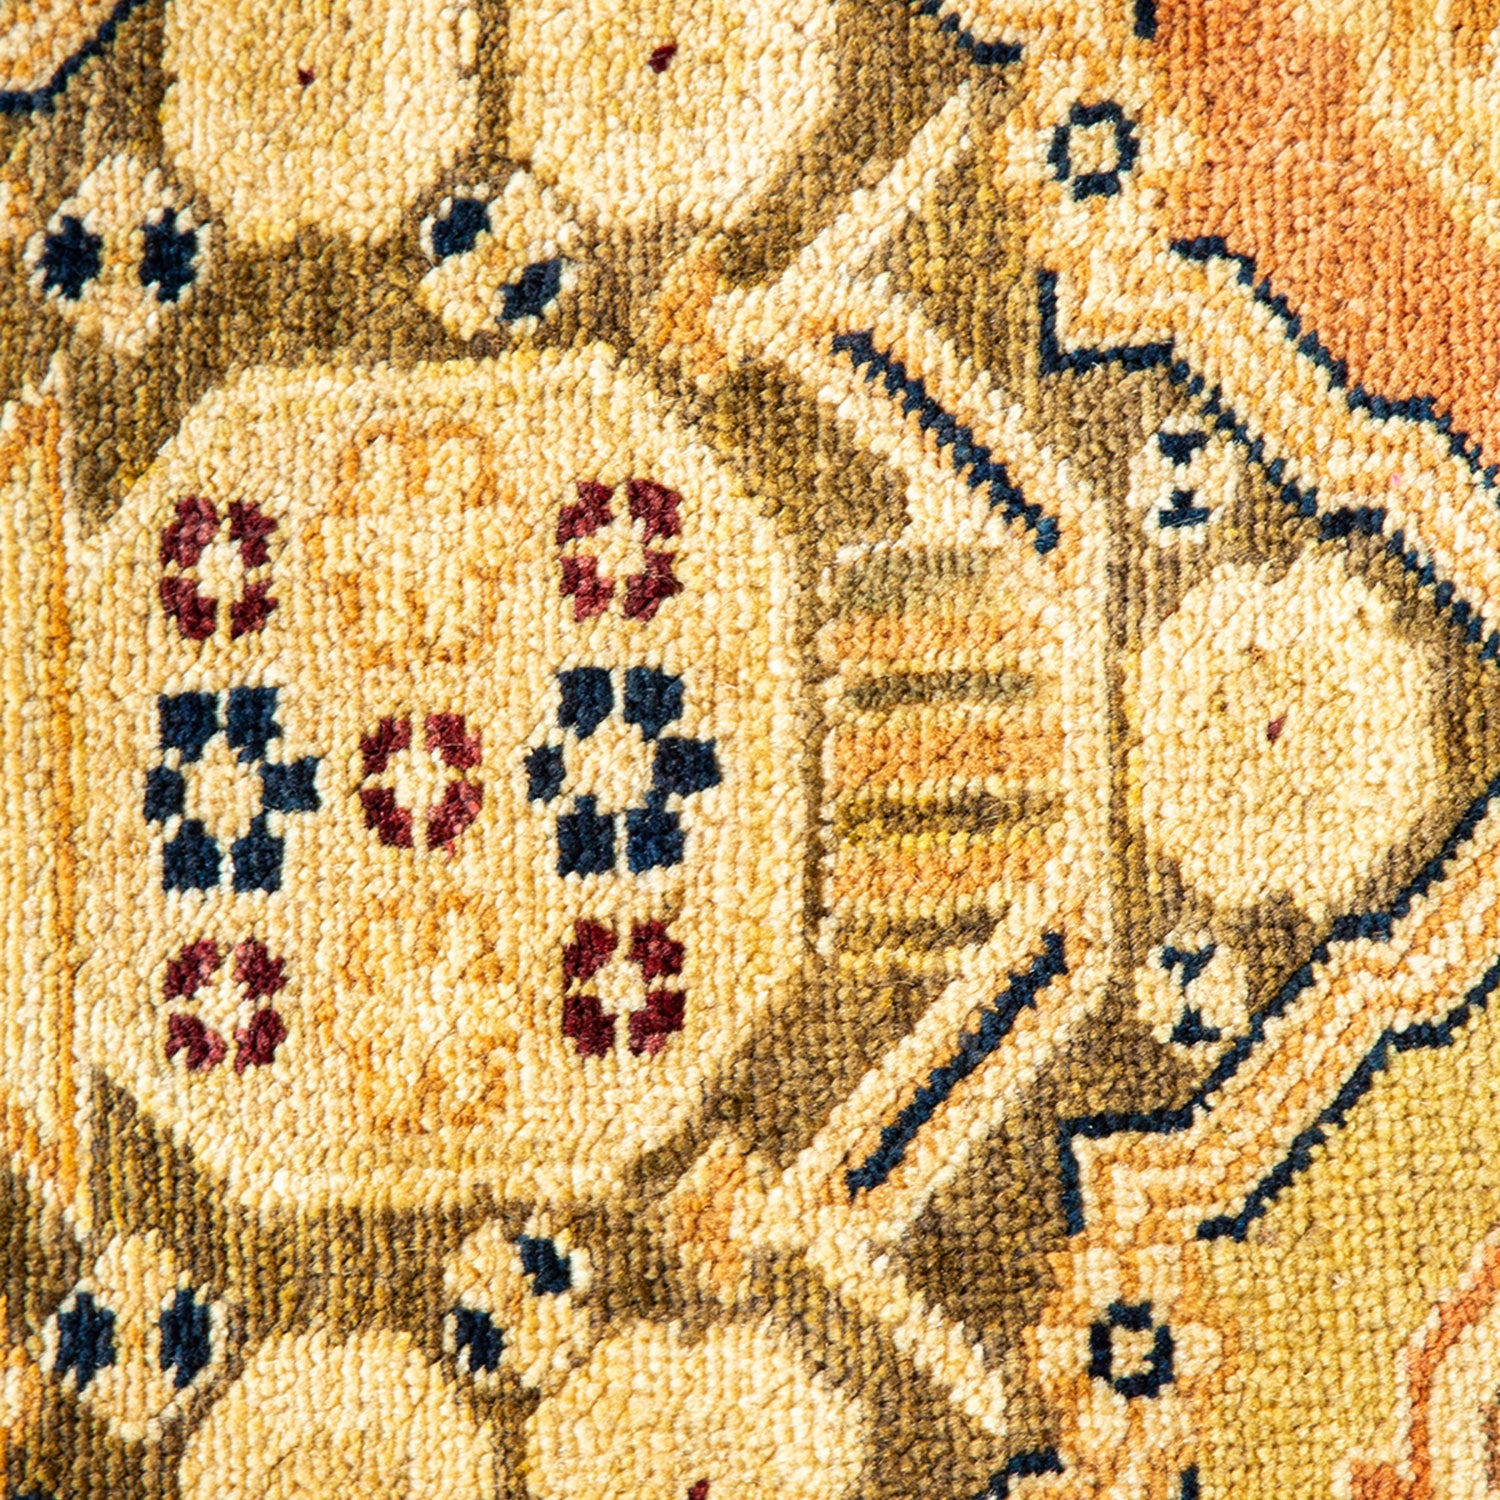 Intricate, handcrafted rug with rich colors and symmetrical design.